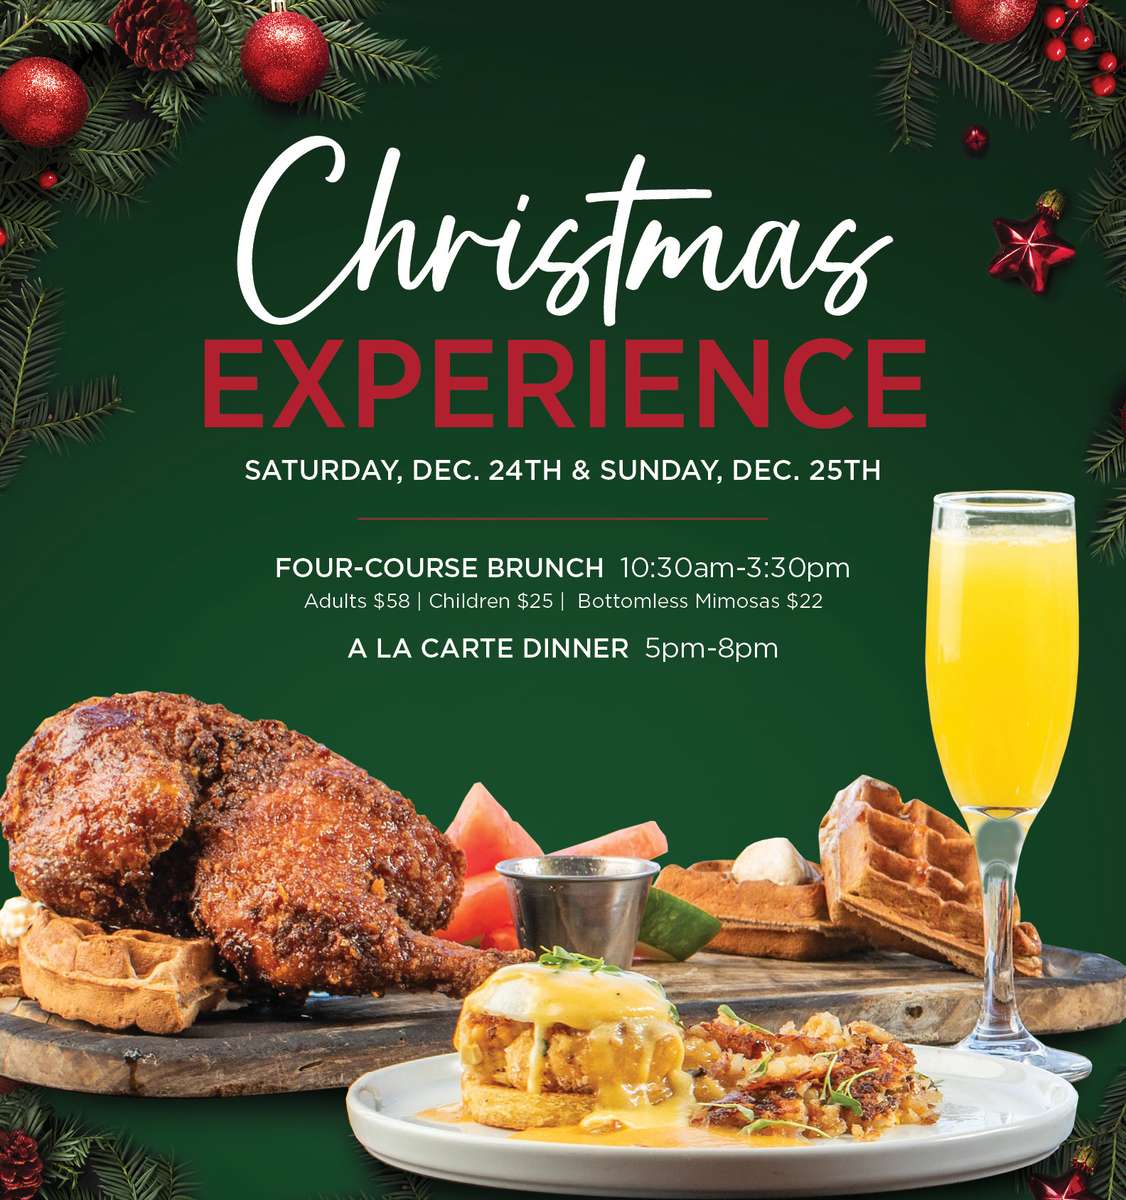 Christmas Experience - Luminarias Restaurant and Special Events